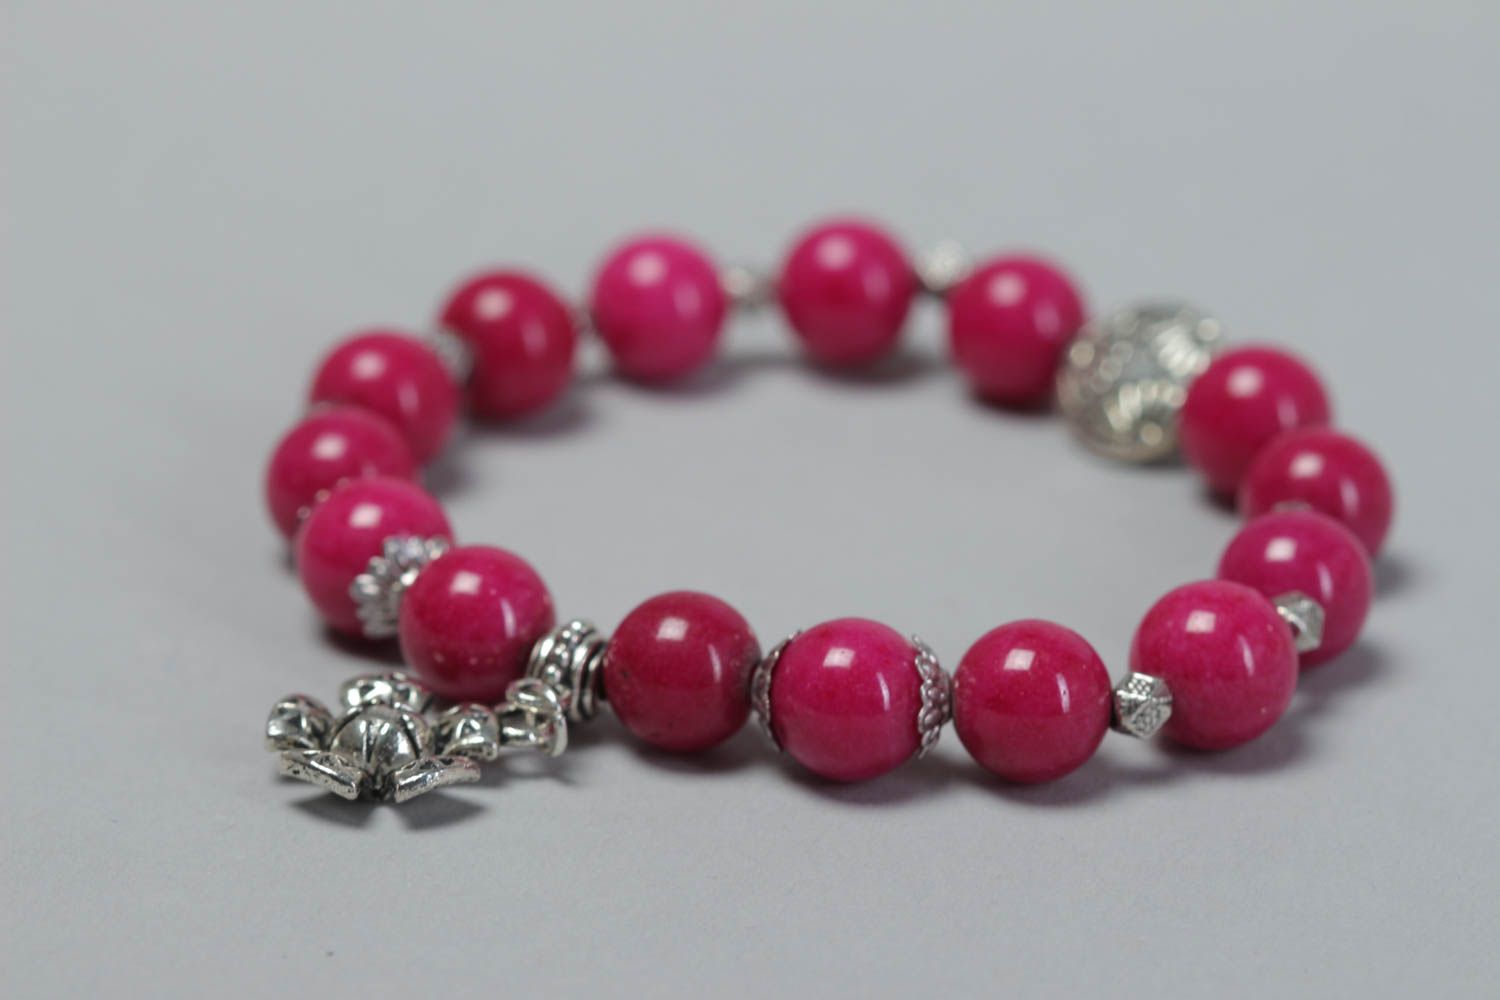 Handmade bracelet with charms stylish bright accessory cute pink jewelry photo 3